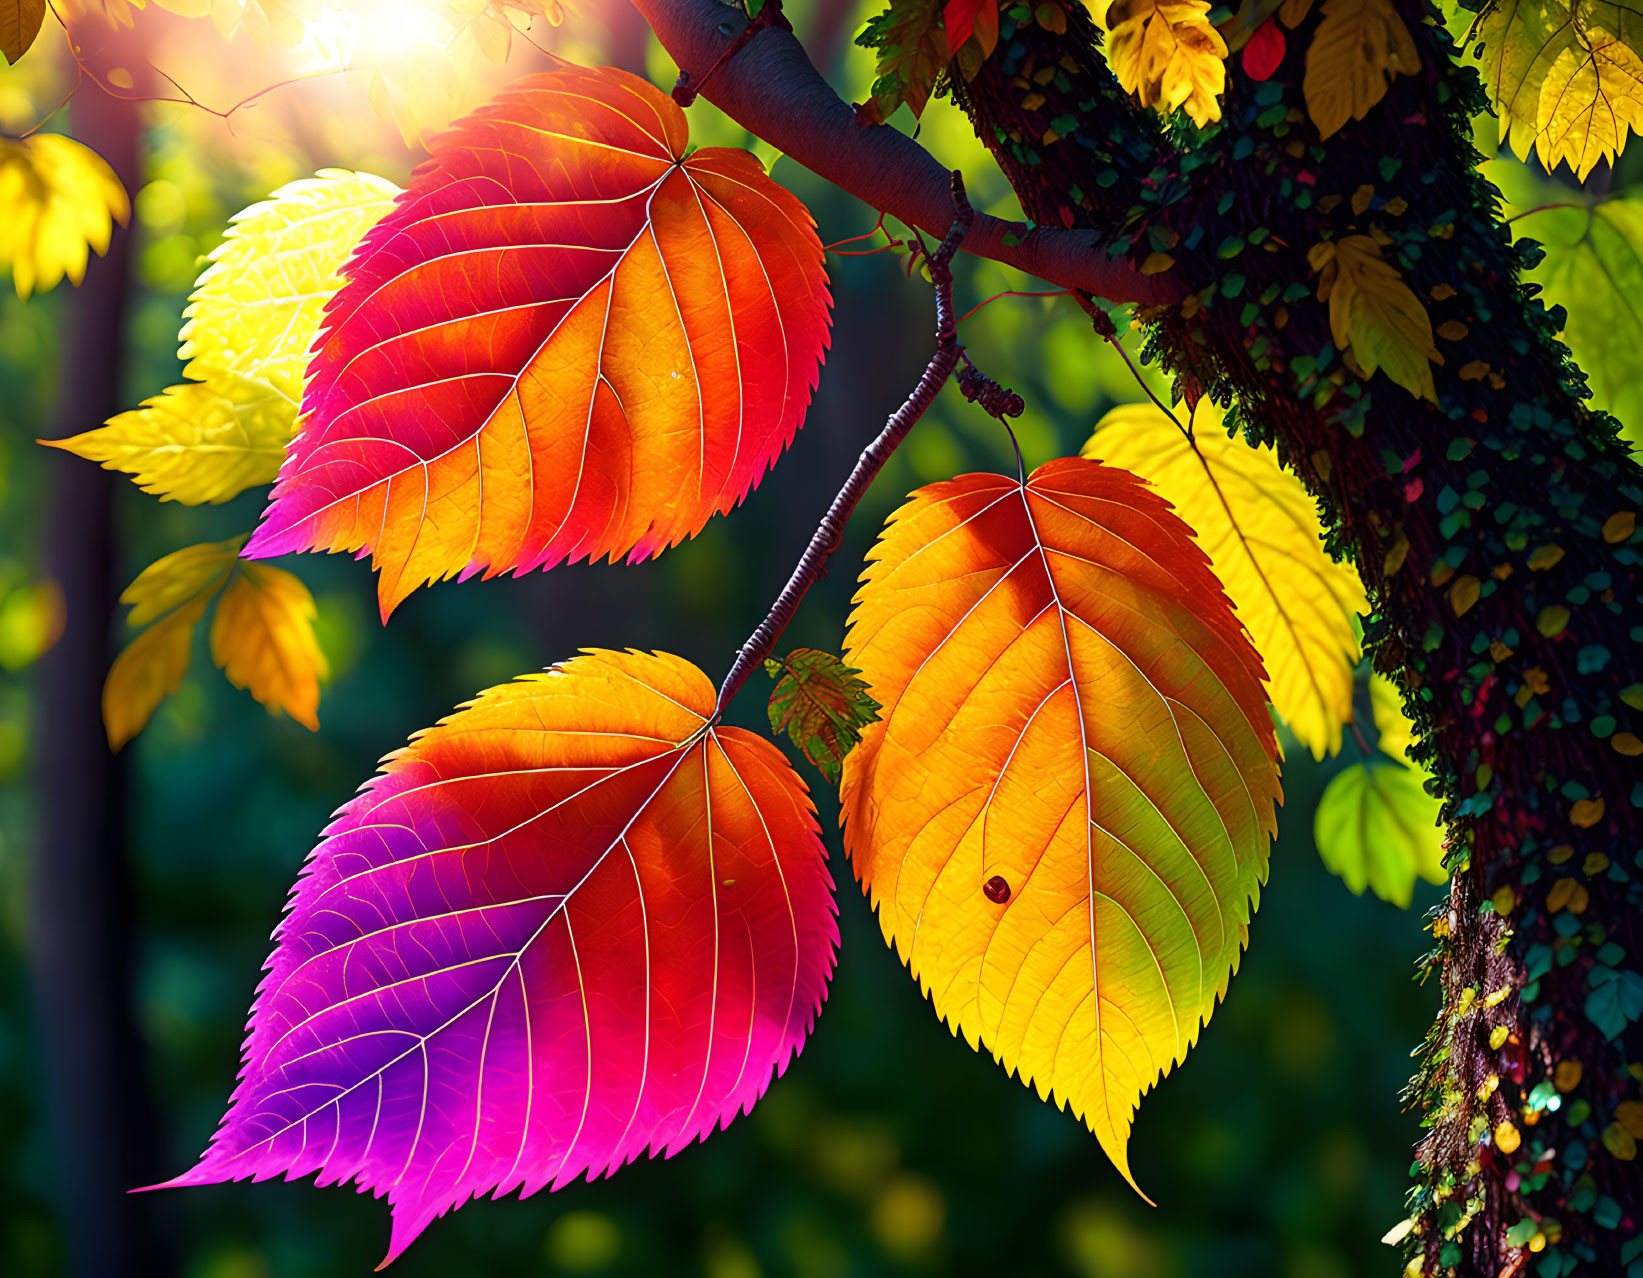 Colorful Autumn Leaves Backlit by Sunlight